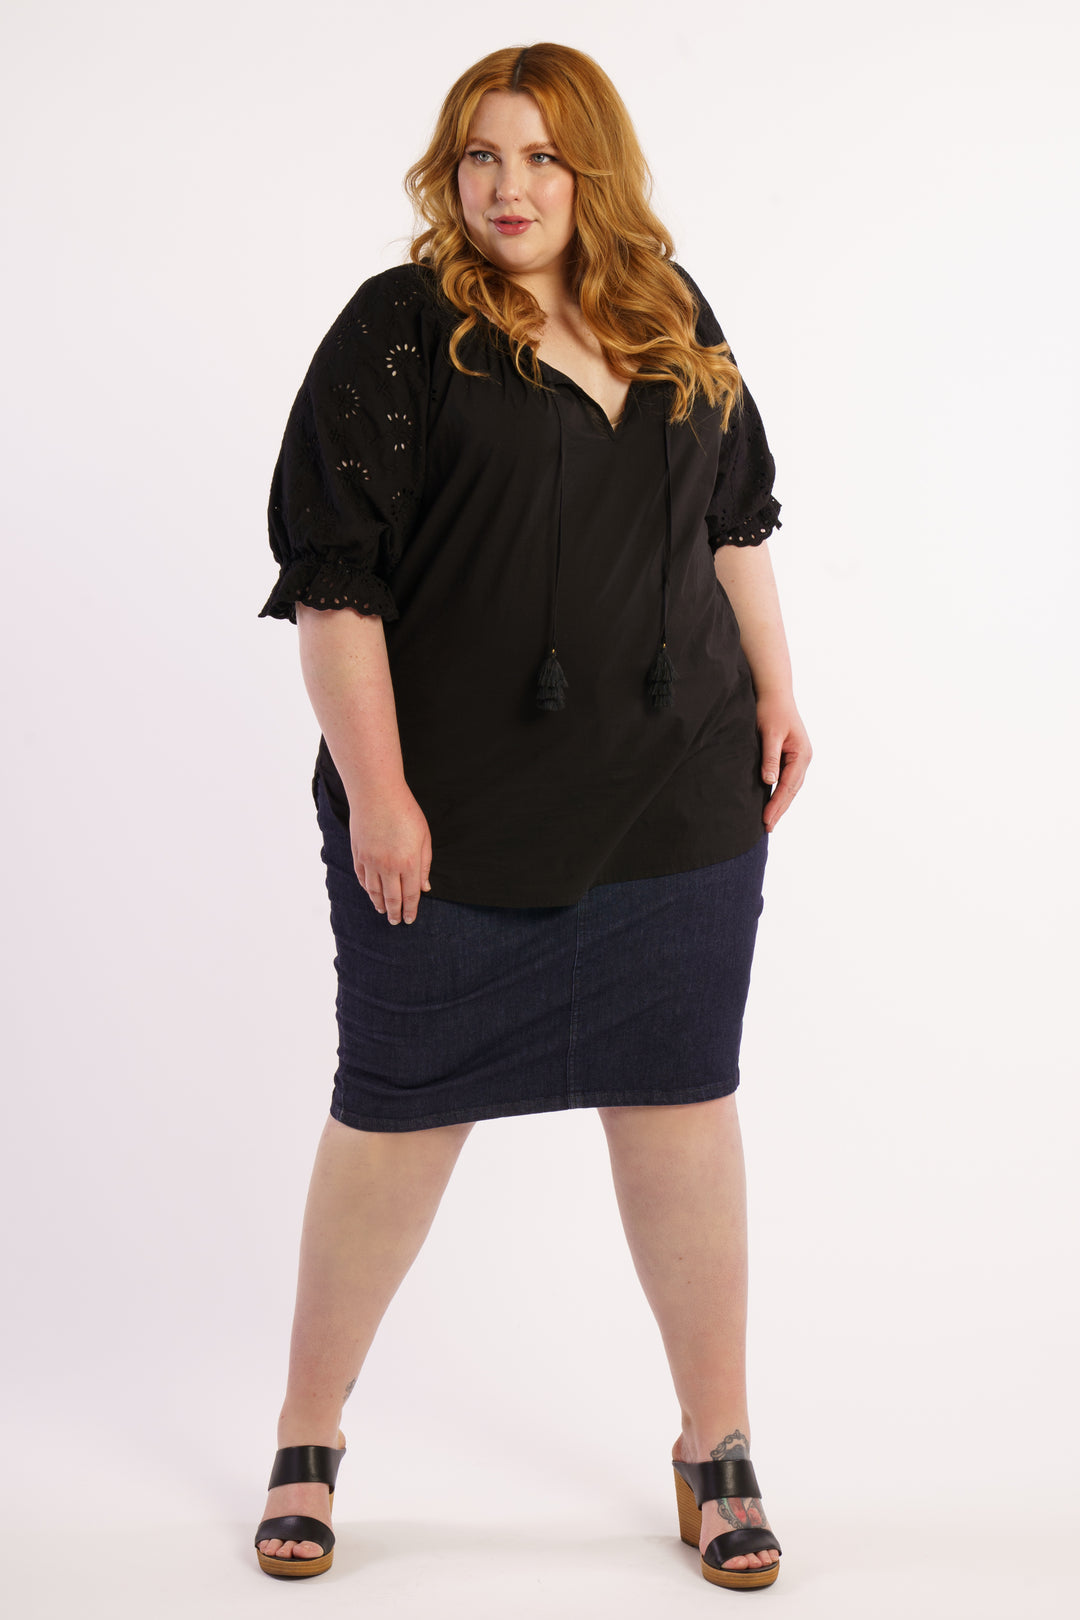 Summer Breeze Broidery Blouse - Black - STOCK AVAILABLE - XS (12/14) & S (14/16)